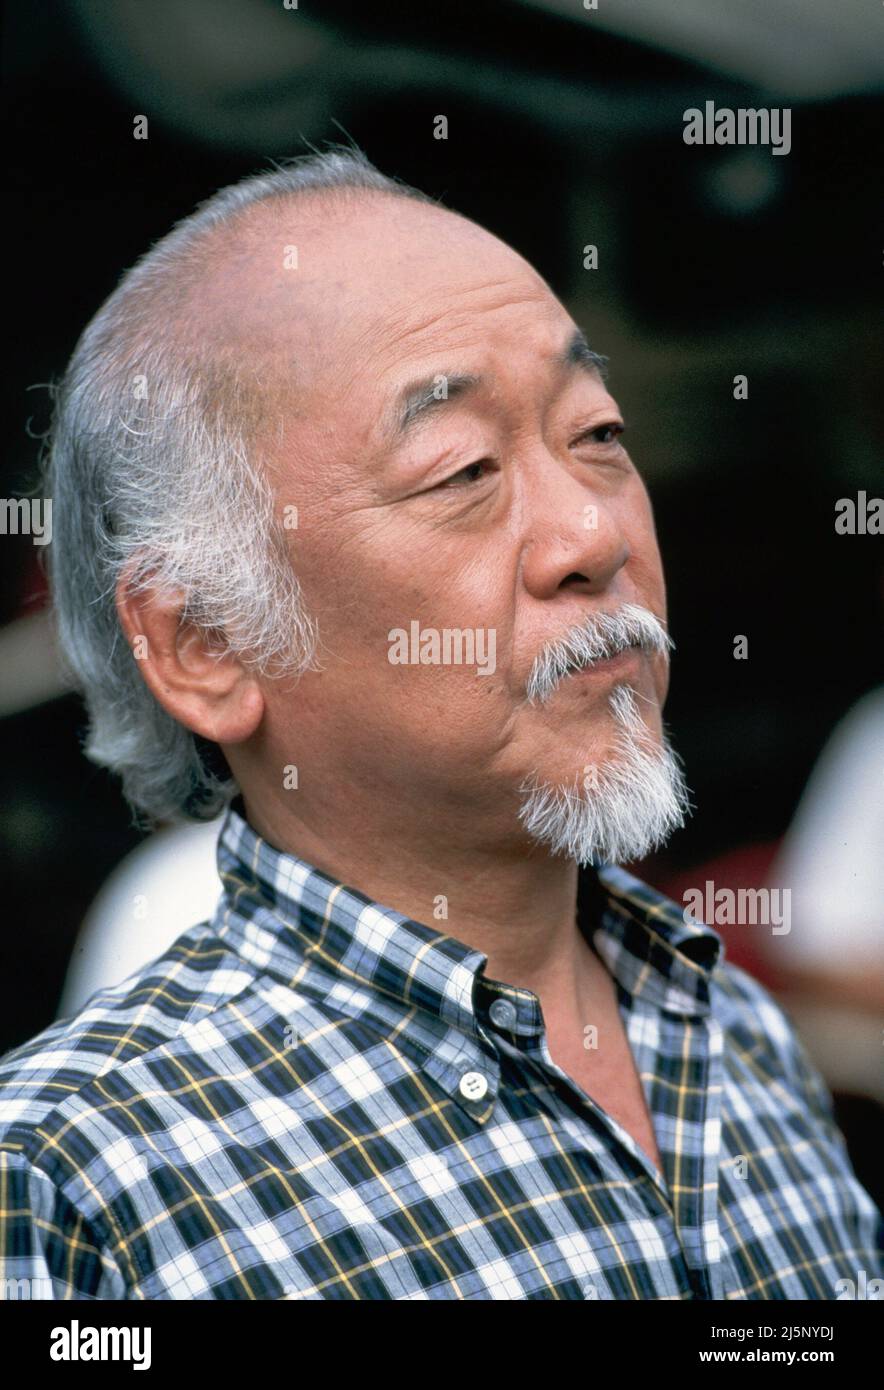 PAT MORITA in THE NEXT KARATE KID (1994), directed by CHRISTOPHER CAIN. Credit: COLUMBIA PICTURES / Album Stock Photo